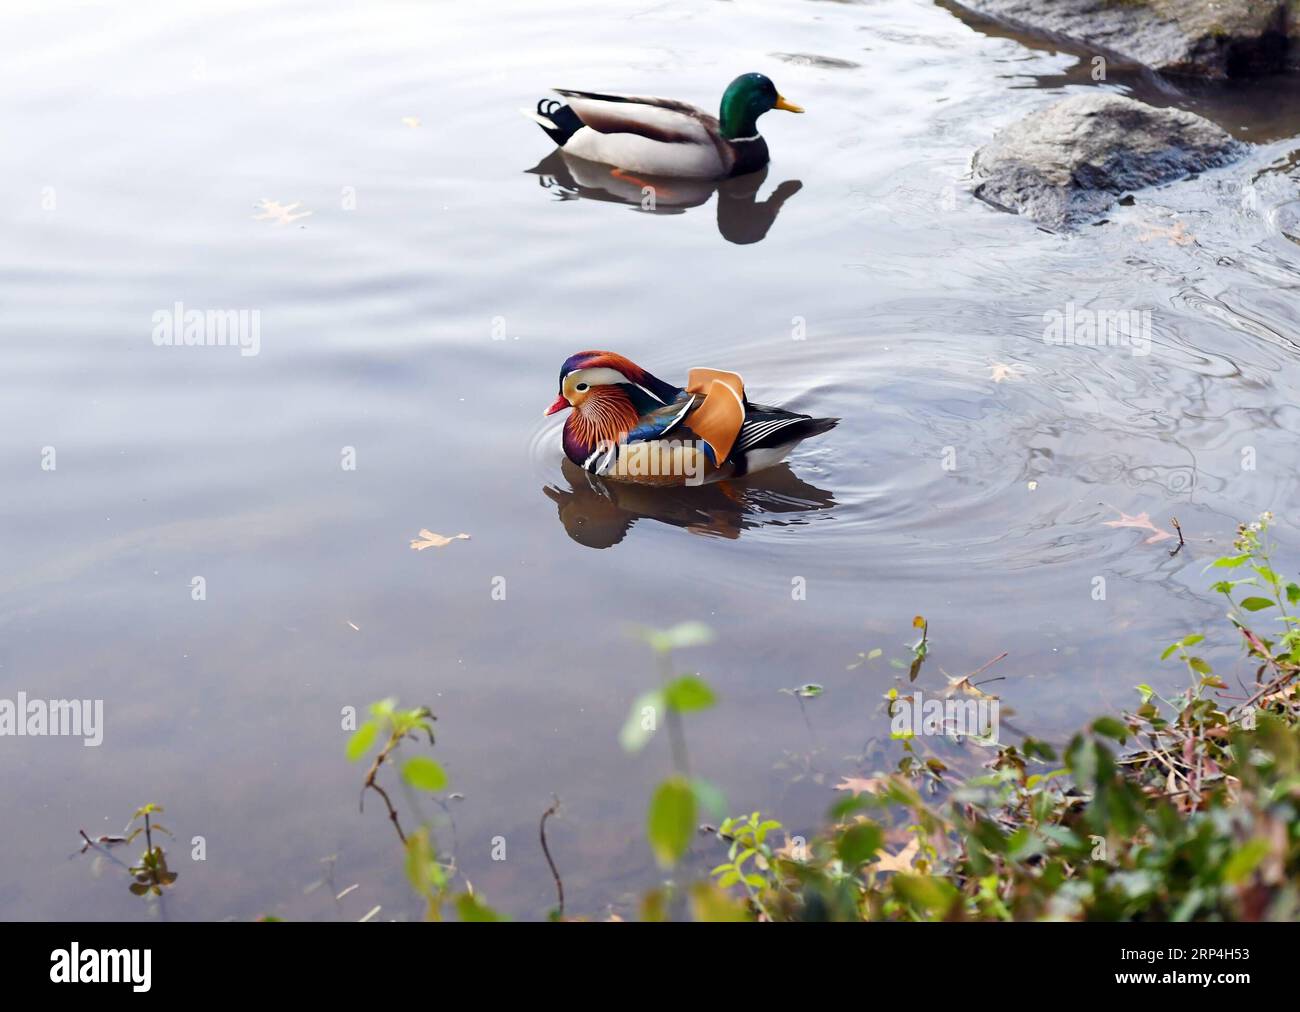 (181109) -- NEW YORK, Nov. 9, 2018 -- A Mandarin duck (Front) paddles on a pond at the Central Park in New York, the United States, on Nov. 8, 2018. Mandarin ducks are native to East Asia and renowned for their dazzling multicolored feathers. This rare Mandarin duck, first spotted in early October, has become a new star at the Central Park, one of New York City s most-visited attractions. ) (yk) U.S.-NEW YORK-MANDARIN DUCK LixRui PUBLICATIONxNOTxINxCHN Stock Photo